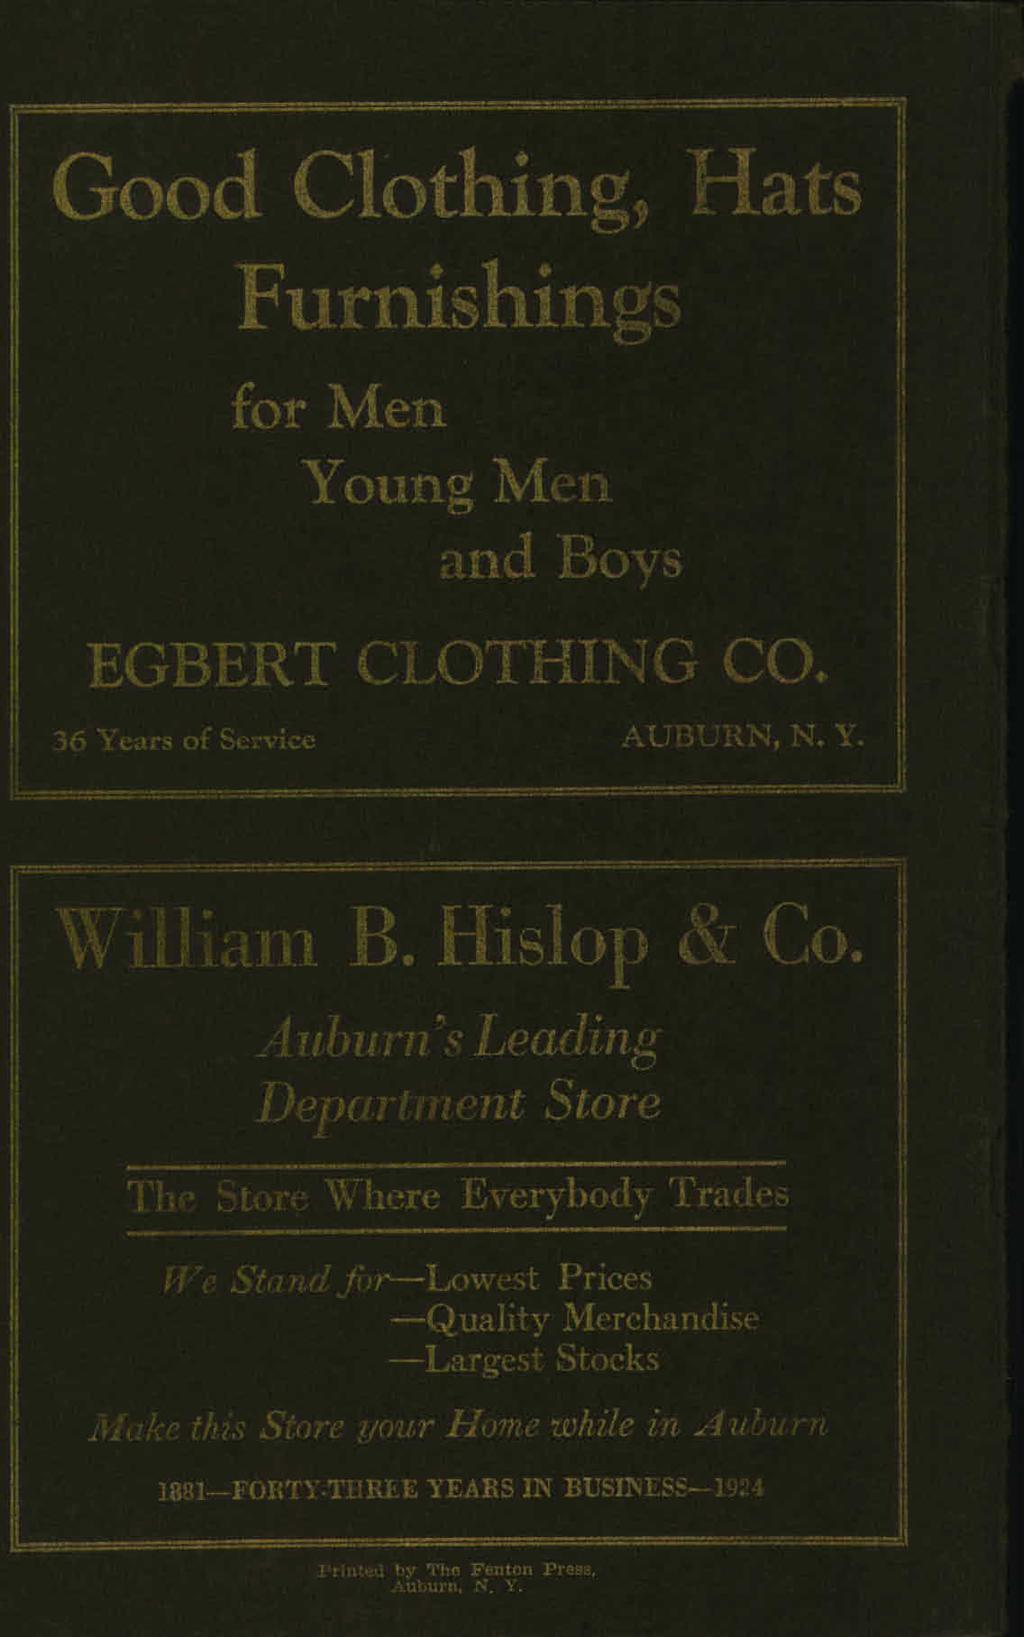 Good Clothing, Hats Furnishings for Men Young Men and Boys GBERT CLOTHNG CO. 3 6 Years of Service AUBUR N, N. Y. t r e e e = = W-Lii.:am B. Hislop & Co.